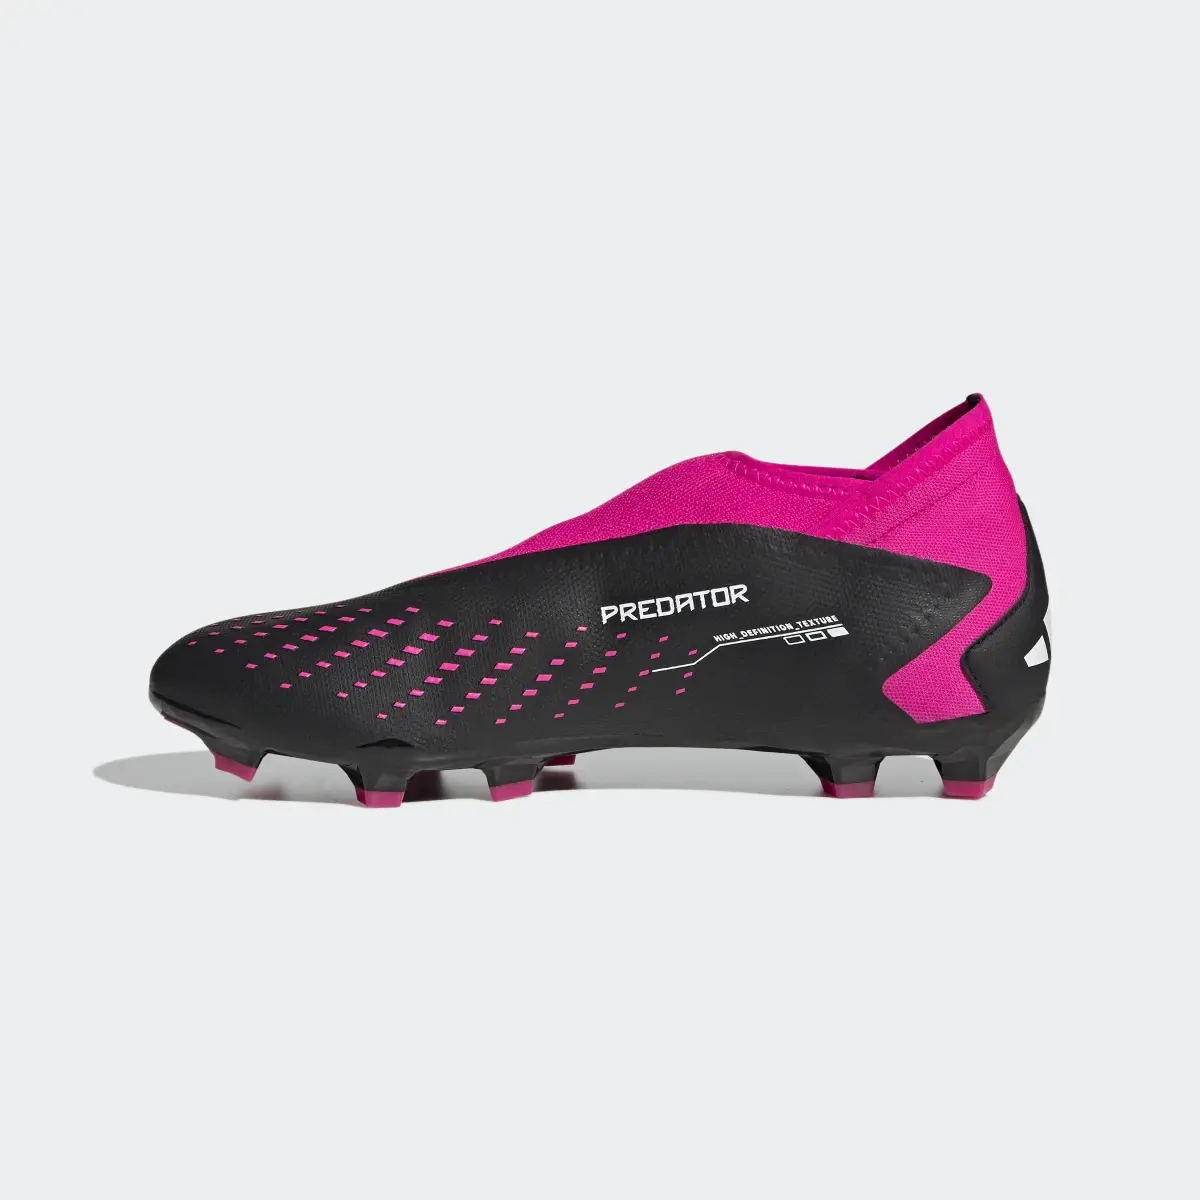 Adidas Predator Accuracy.3 Laceless Firm Ground Boots. 3